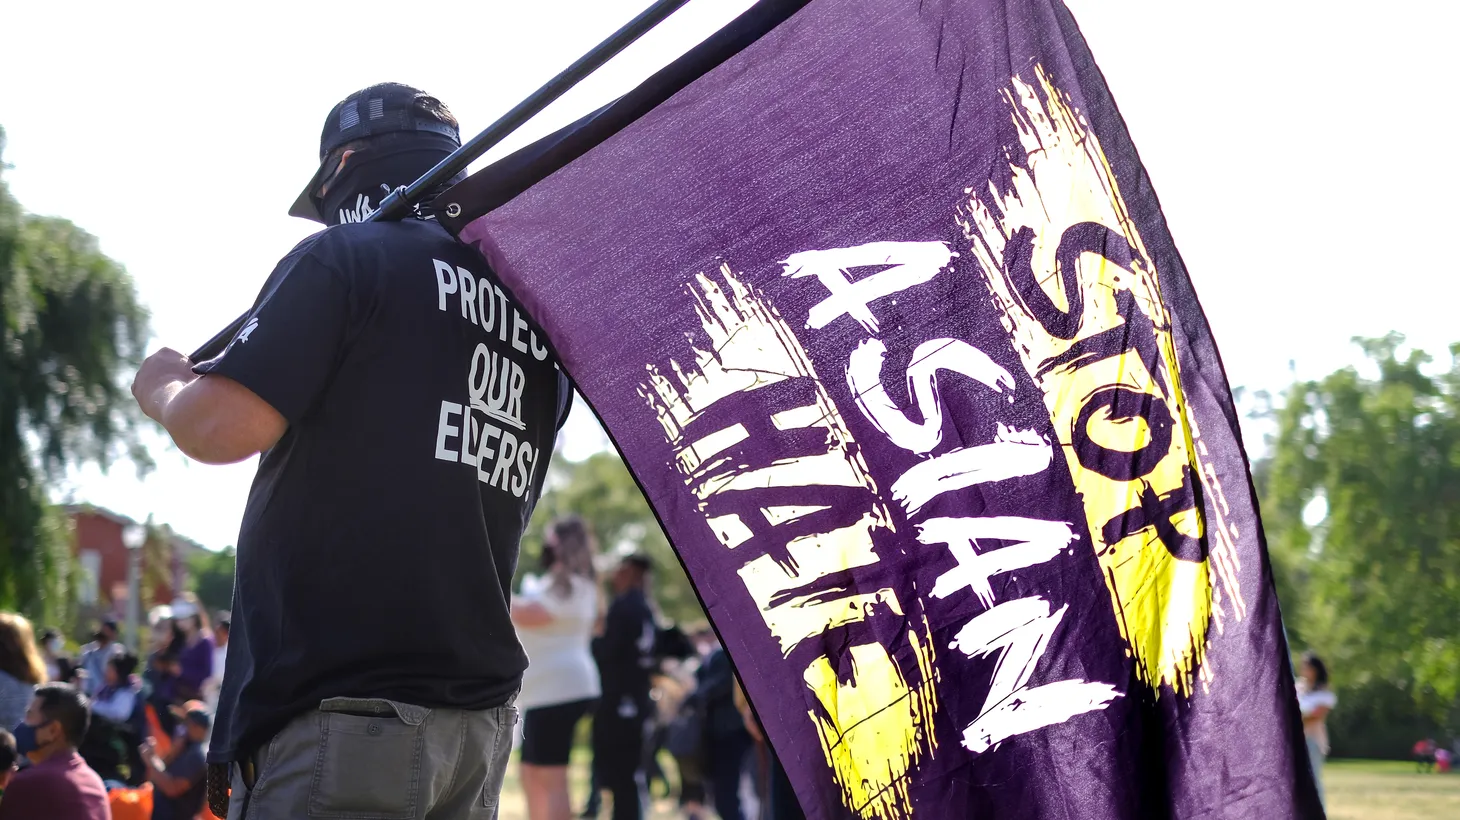 A man holds a flag that says, “STOP ASIAN HATE,” while wearing a t-shirt that says, “Protect your elders,” at a rally in the San Gabriel Valley, California, May 22, 2021.